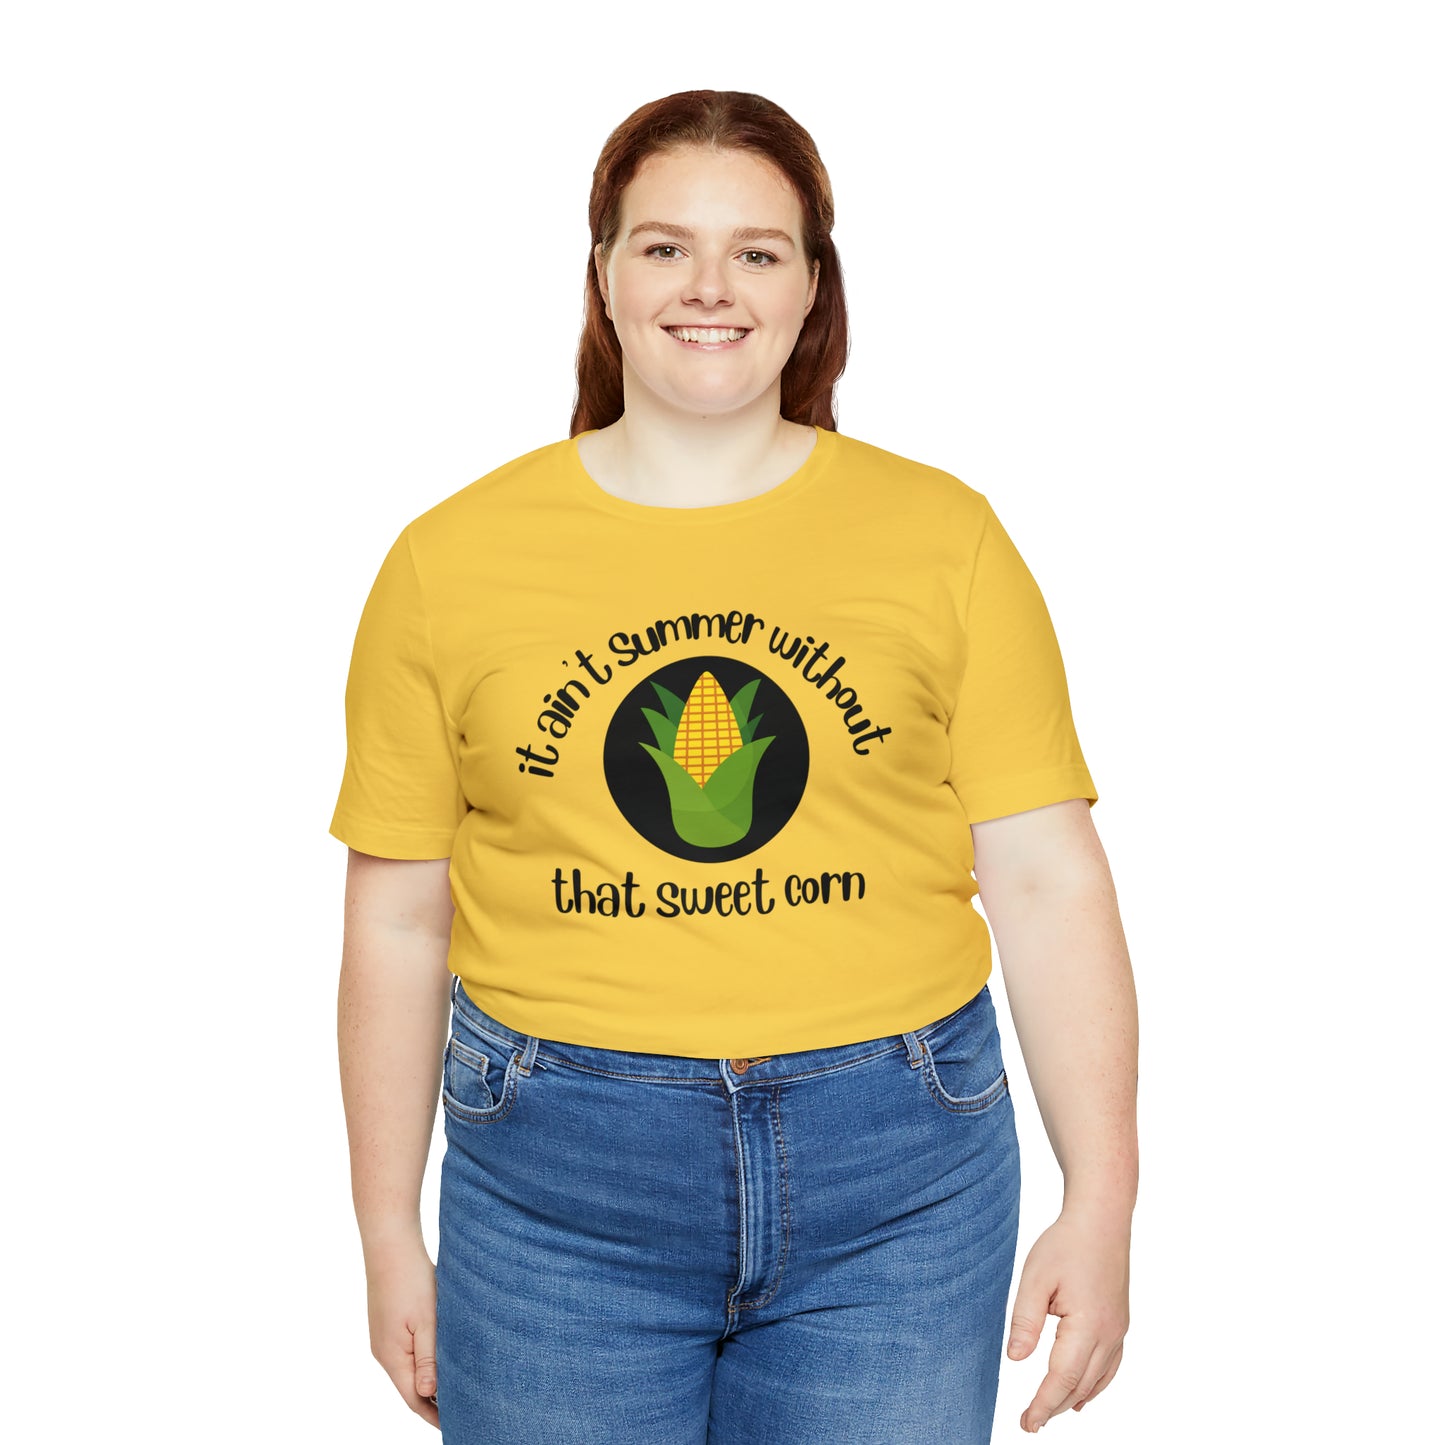 It's Ain't Summer Without That Sweet Corn Unisex Short Sleeve Tee S-3XL